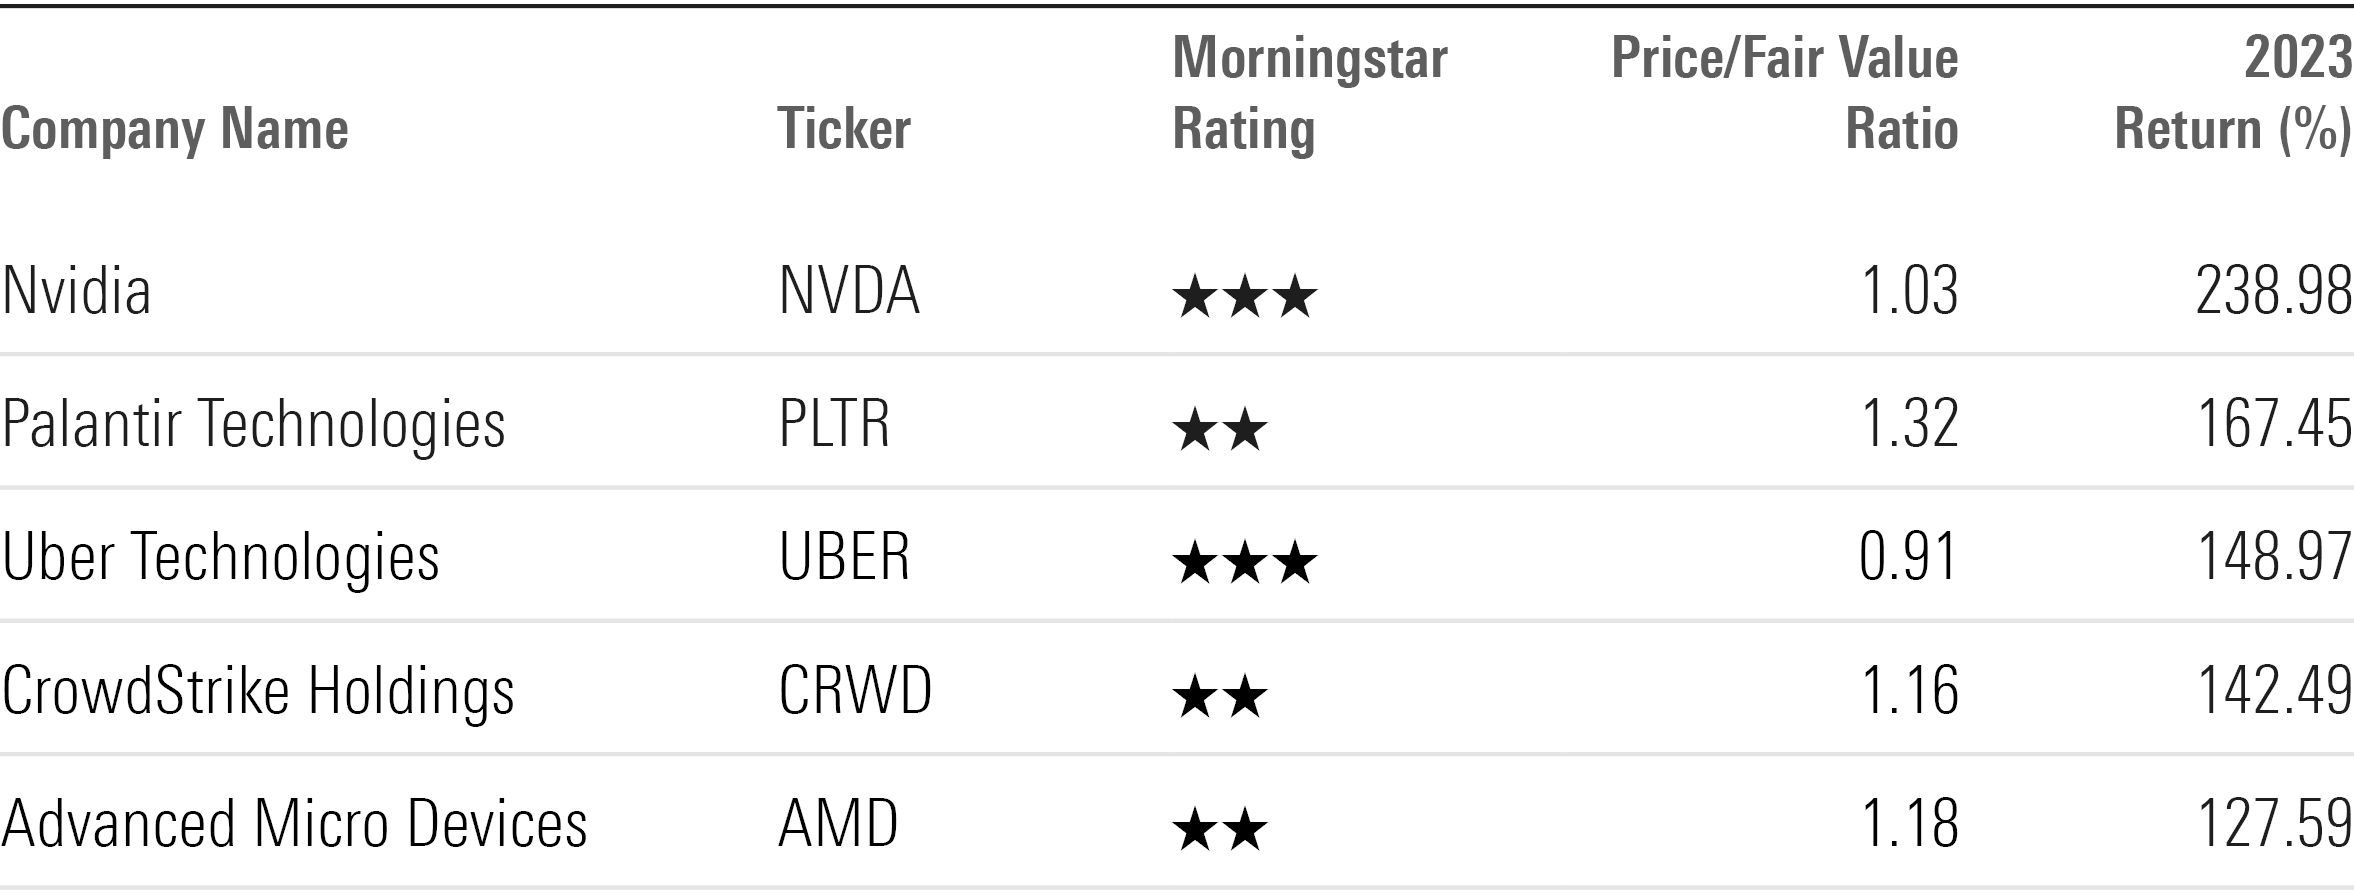 Table showing ticker, Morningstar Rating, price/fair value ratio, and return for the top-performing technology stocks of 2023.